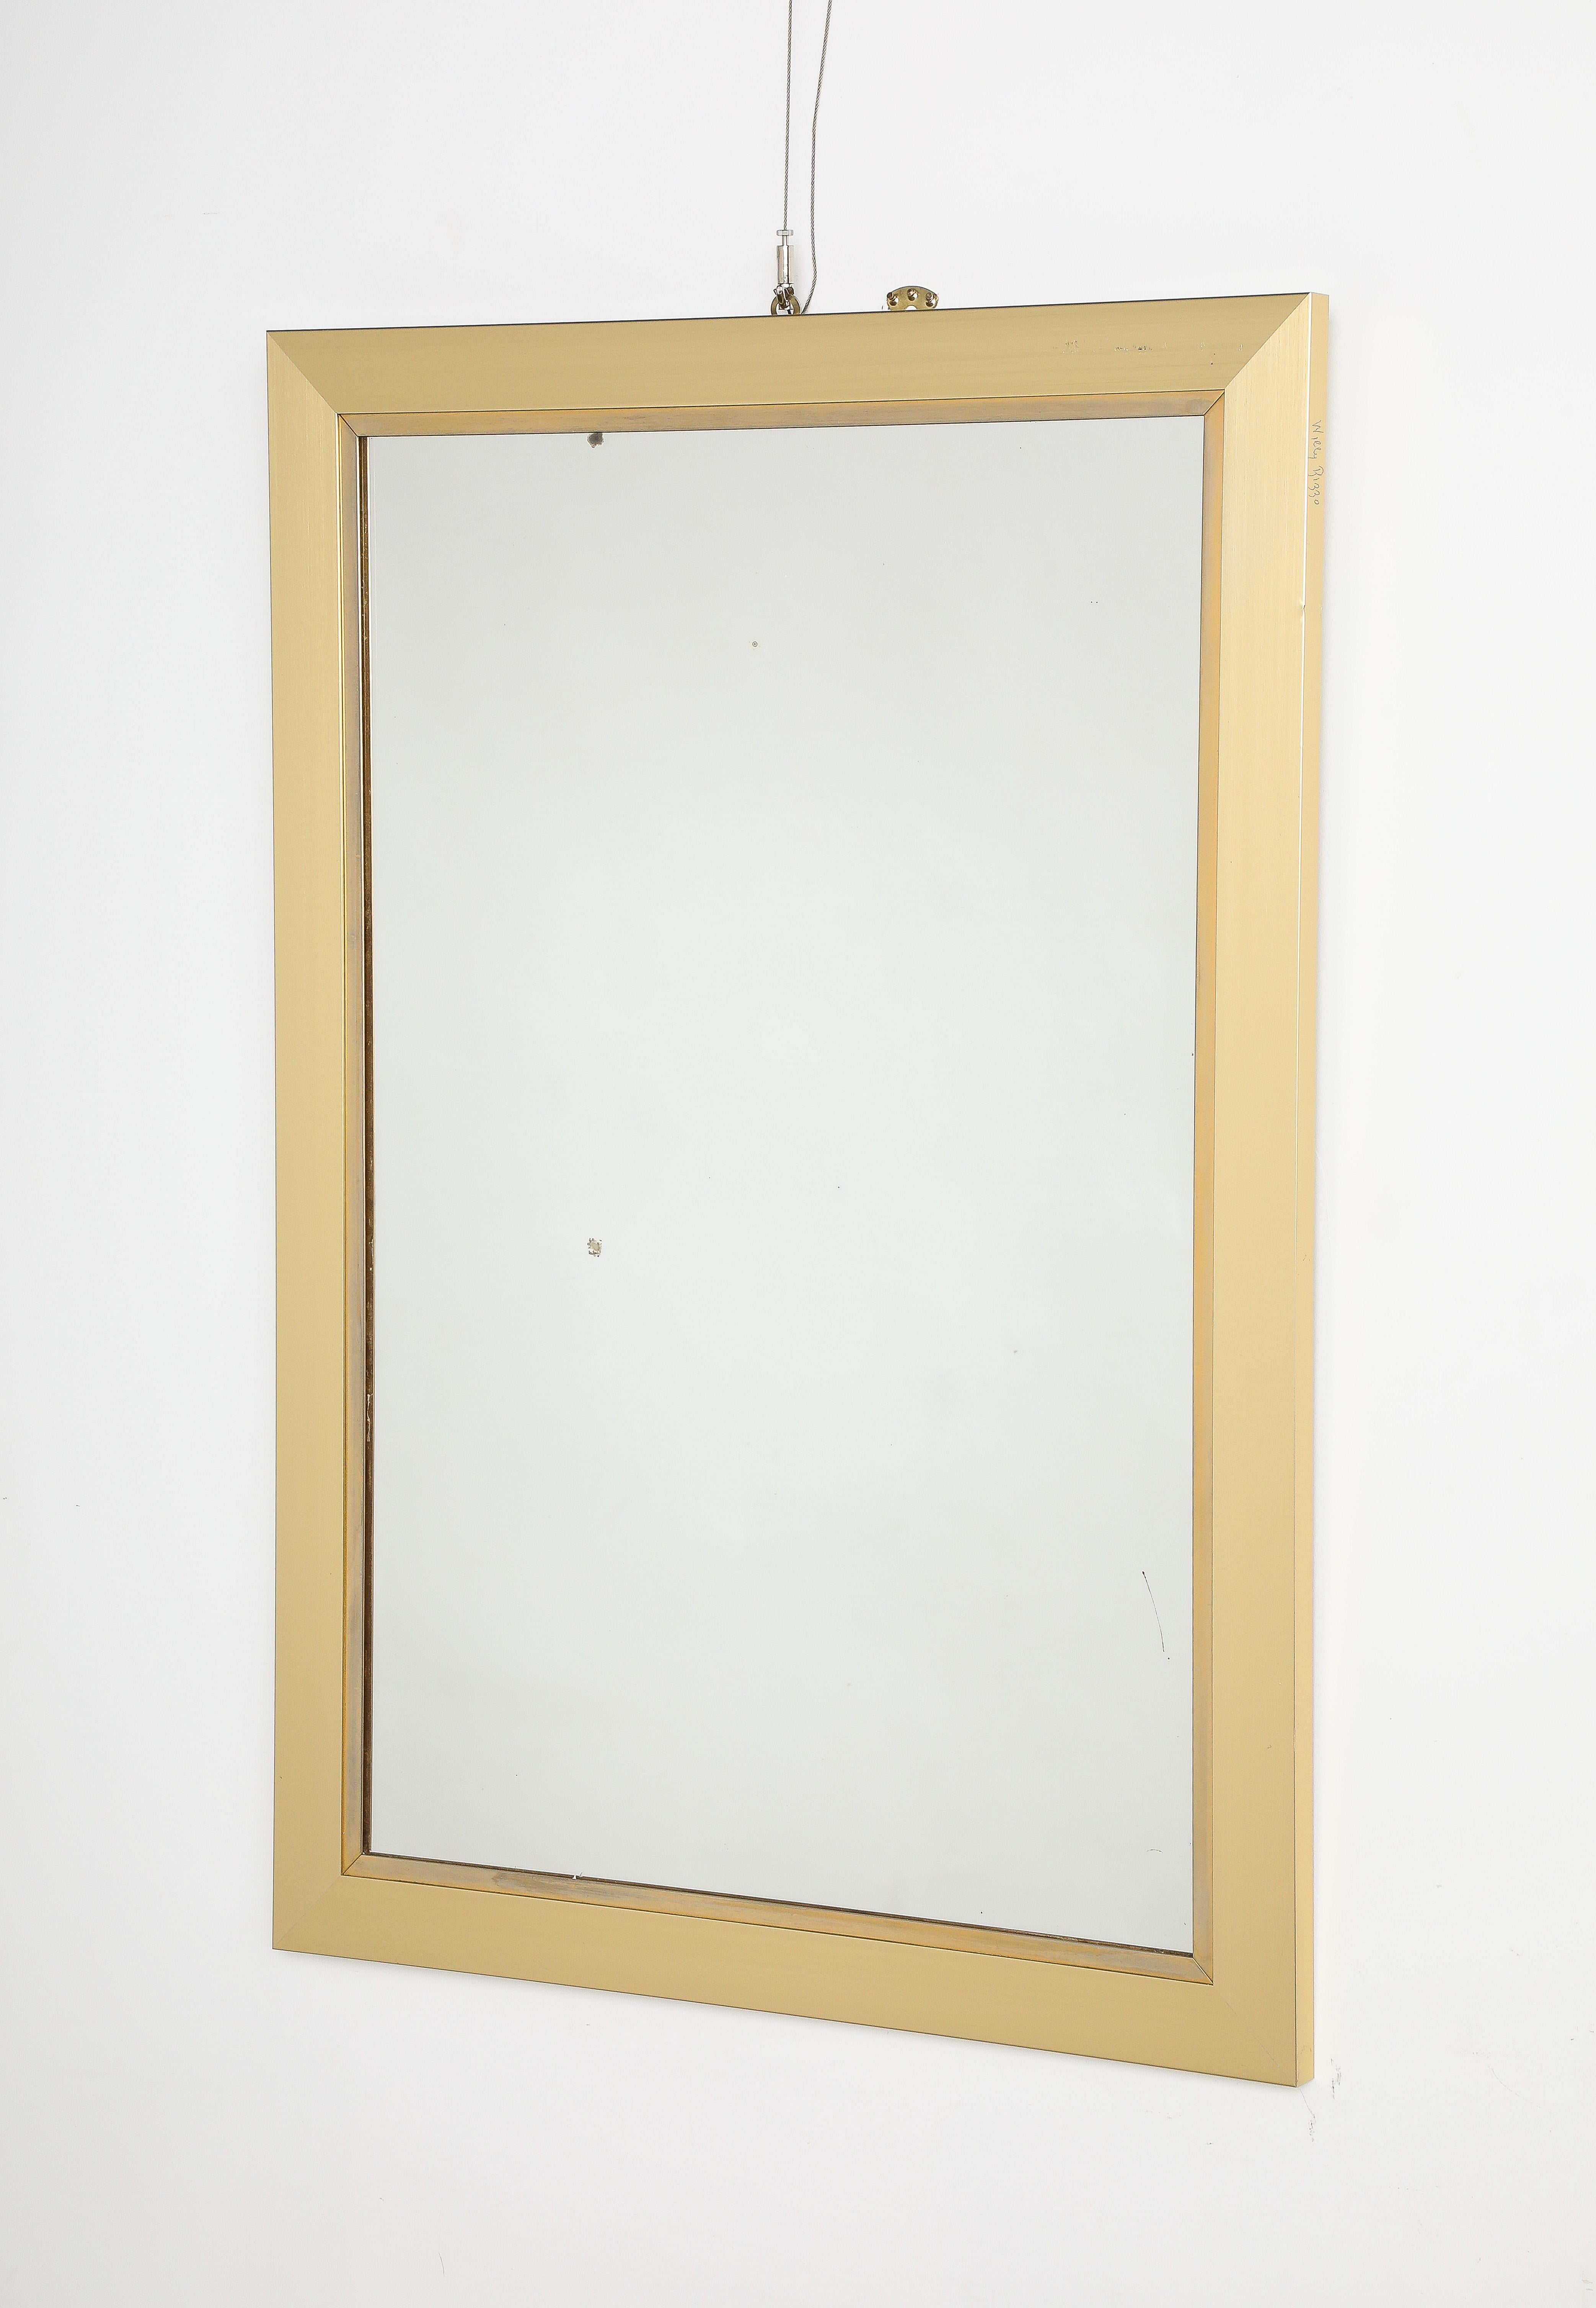 Celebrated luxury furniture designer Willy Rizzo designed this beautiful brushed brass wall mirror, circa 1970.  With sharp and clean lines, the piece is sleek and streamlined.  The brushed steel is a wonderful golden hue which highlights the